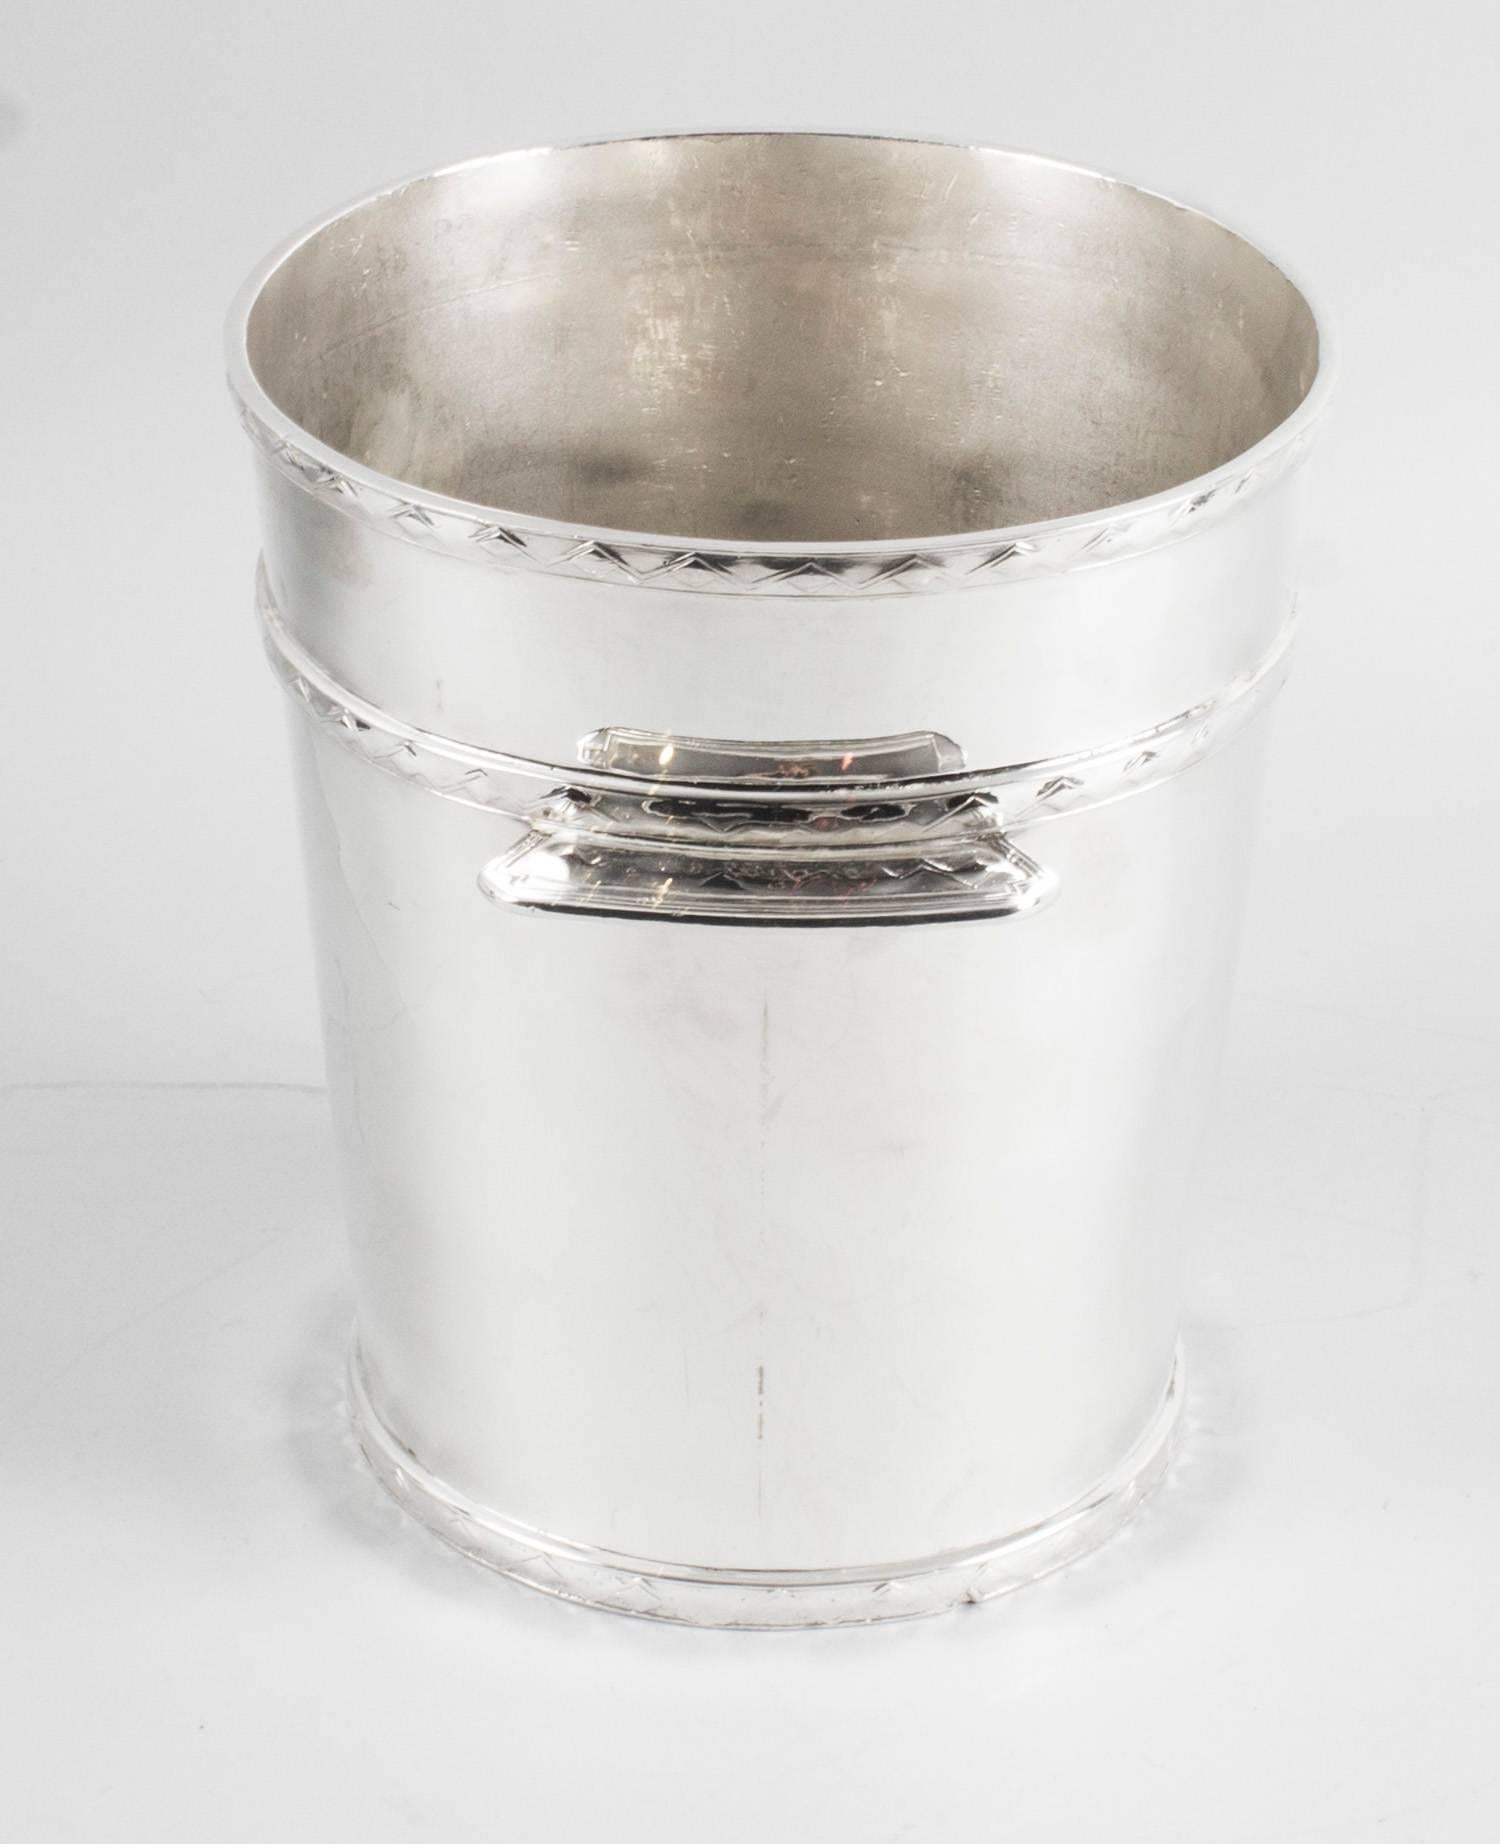 This is wonderful antique English Art Deco silver plated champagne bucket, circa 1930 in date.

It bears the makers mark of Gladwin Ltd, Sheffield.

There is no mistaking its unique quality and design, which is sure to make it a treasured piece